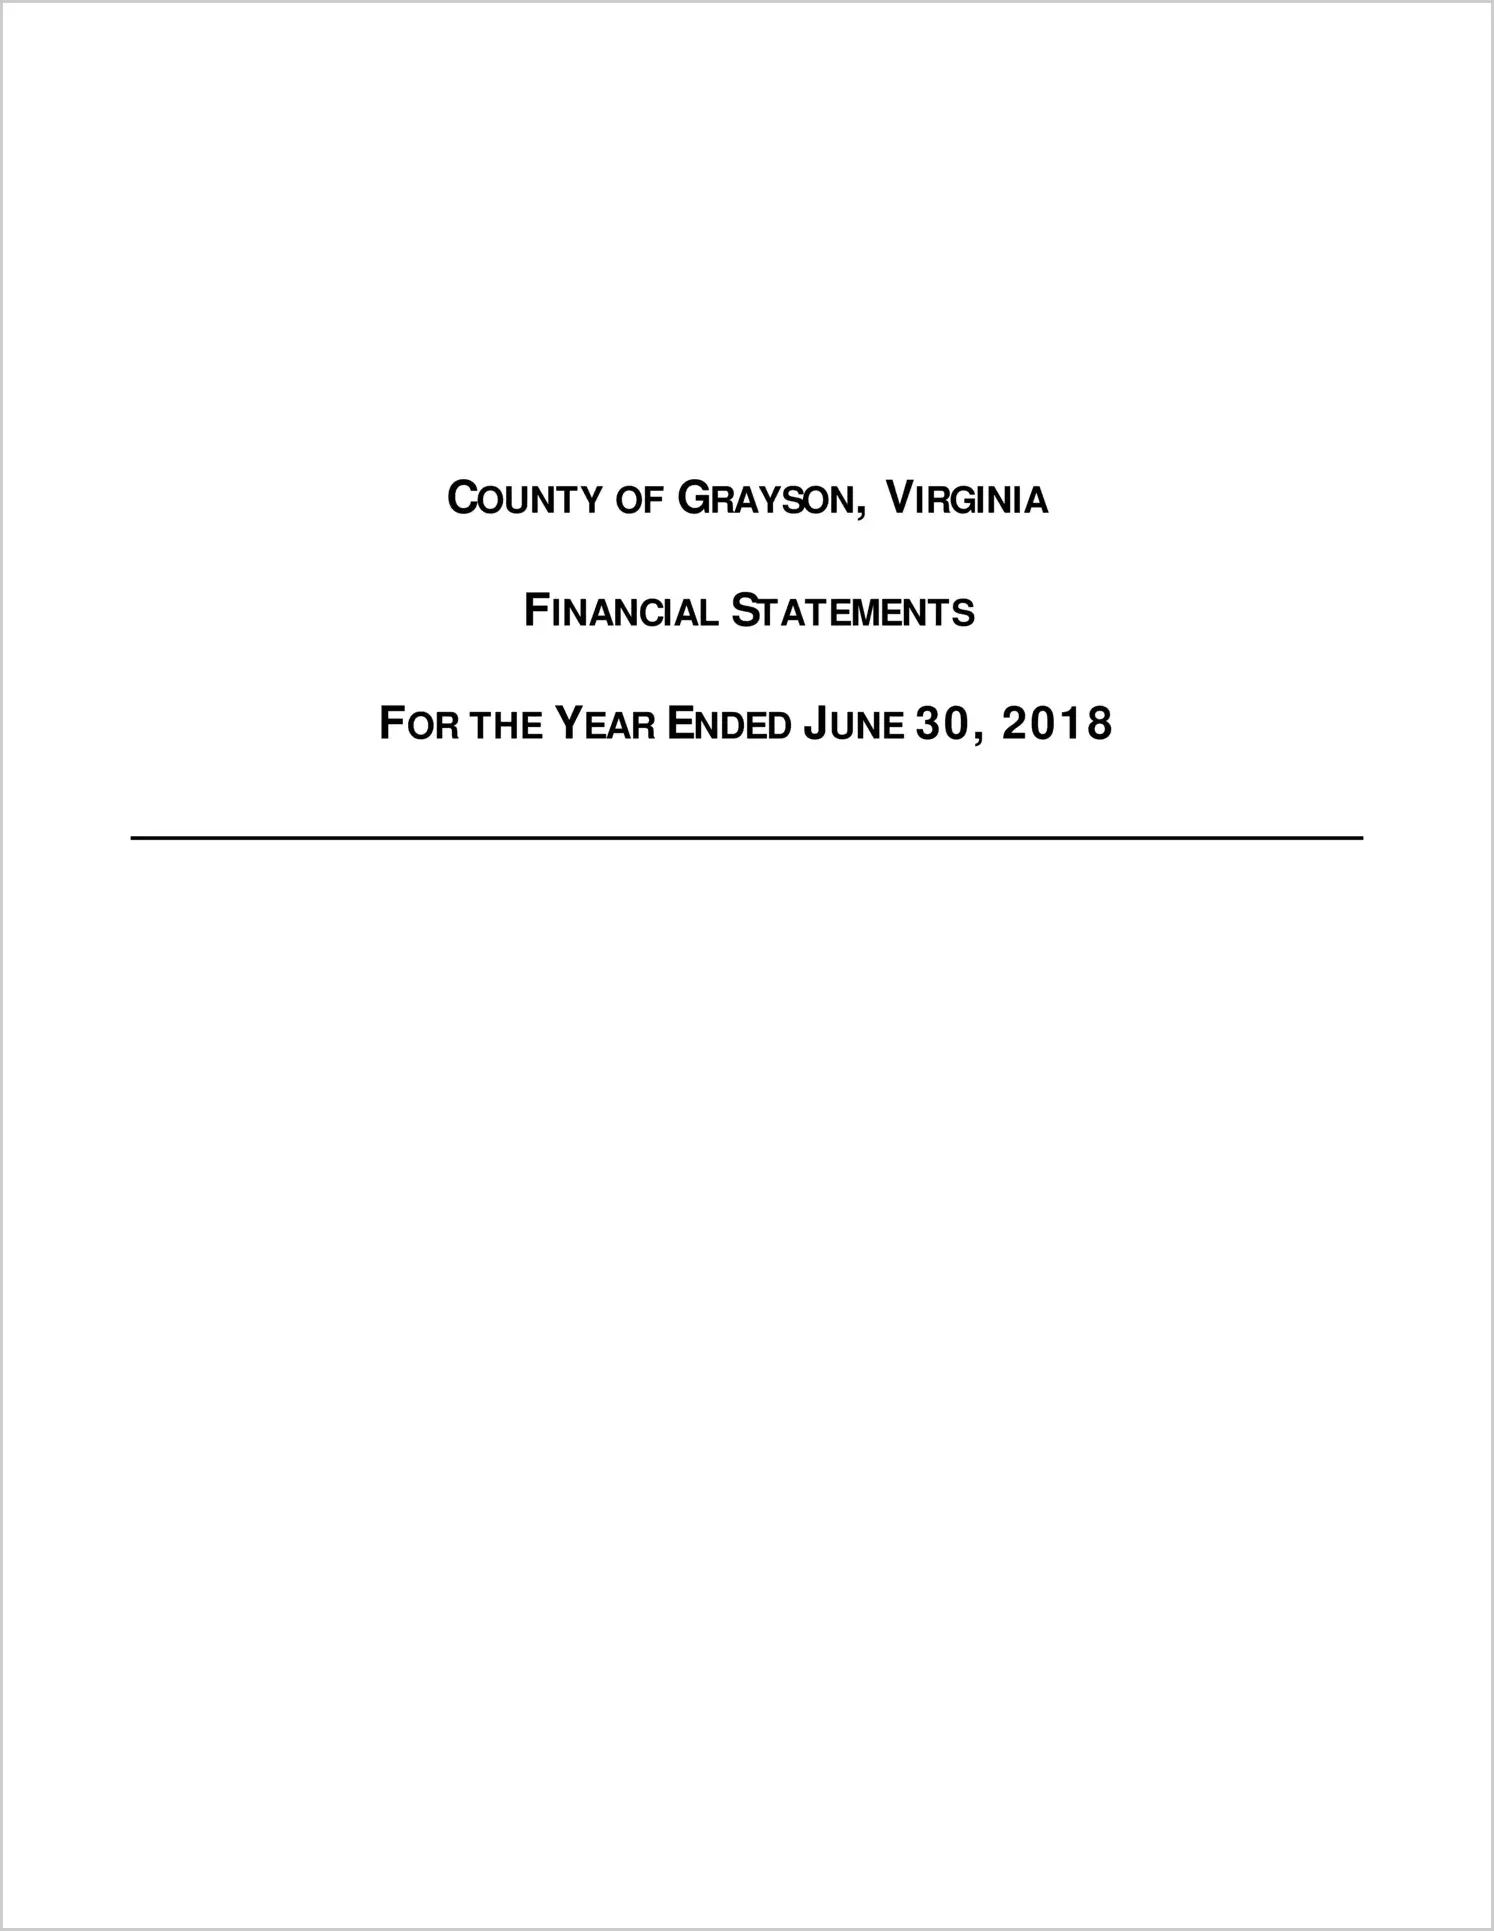 2018 Annual Financial Report for County of Grayson